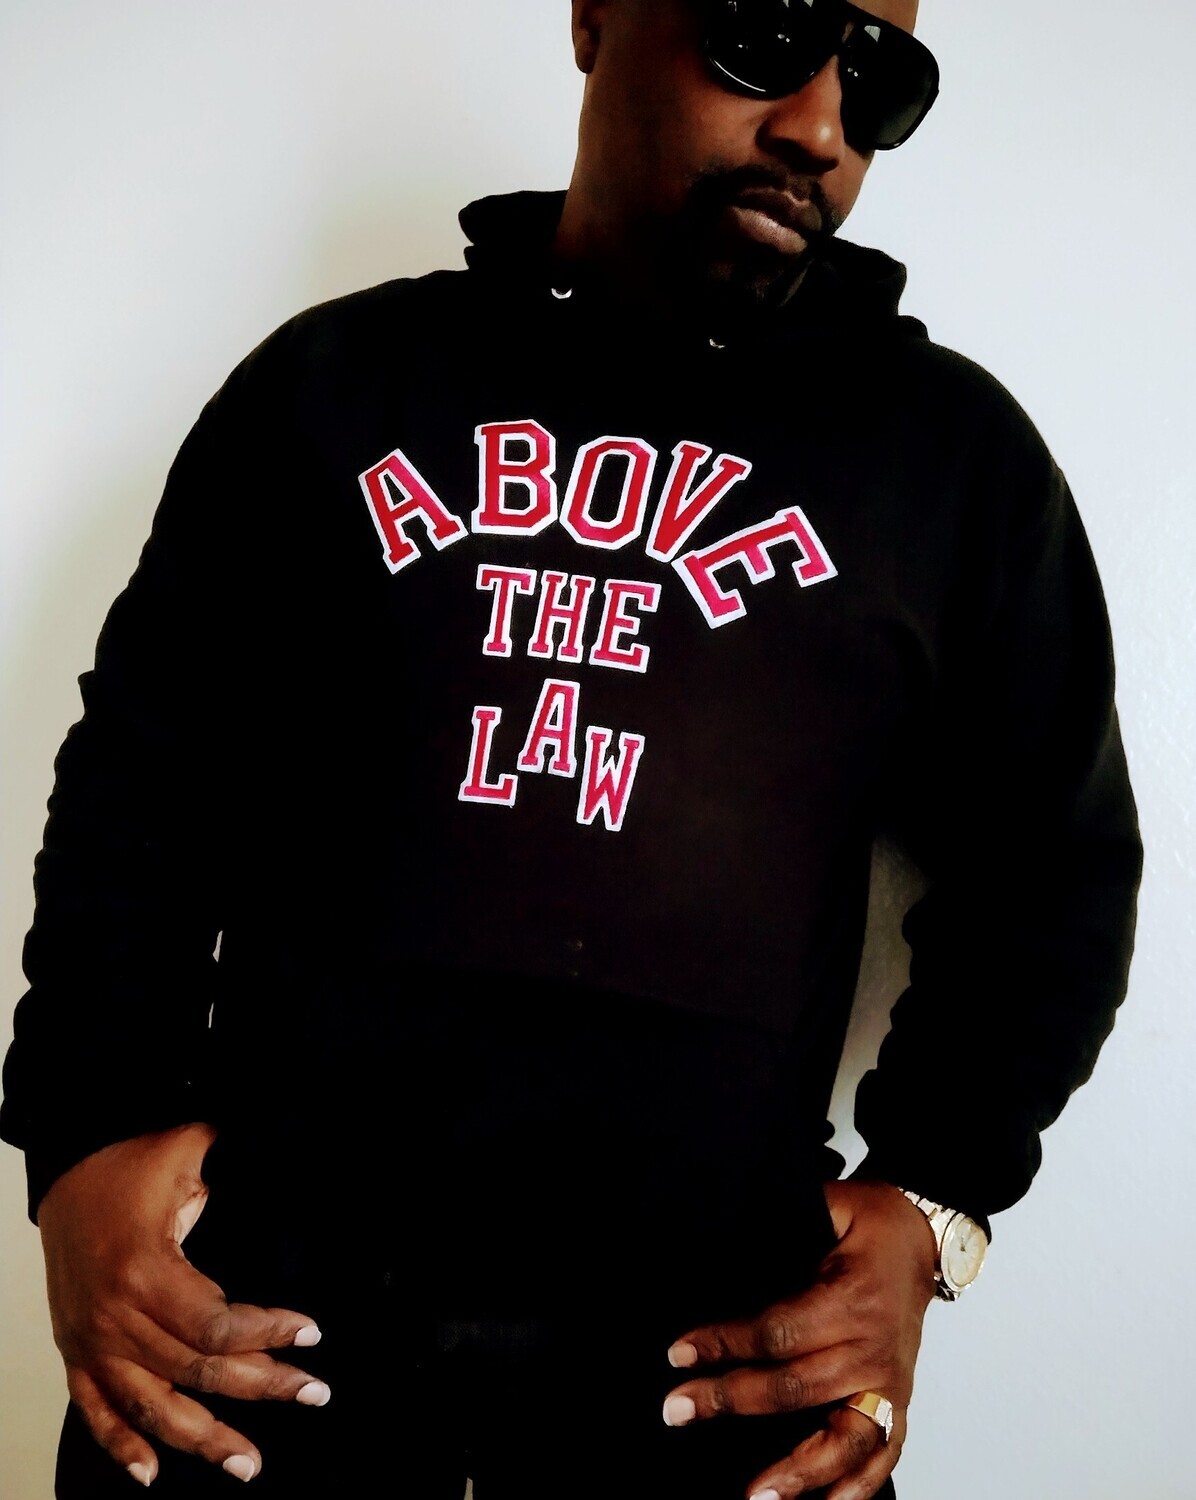 OG ABOVE THE LAW UNIVERSITY HOODIE
Shipping included